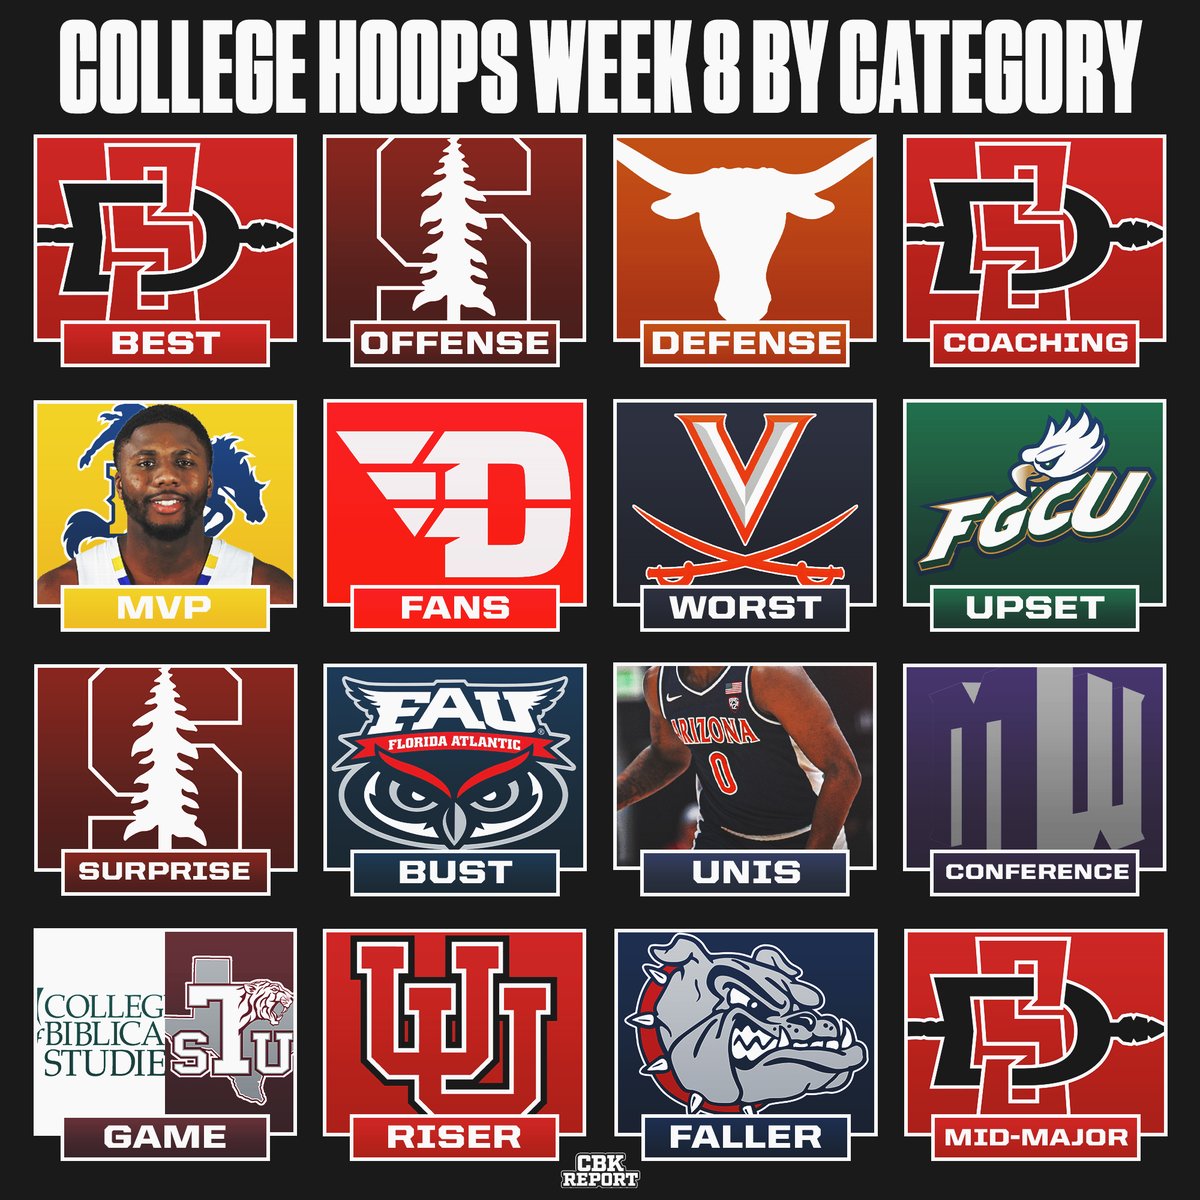 Week 8 College Basketball by category🏀